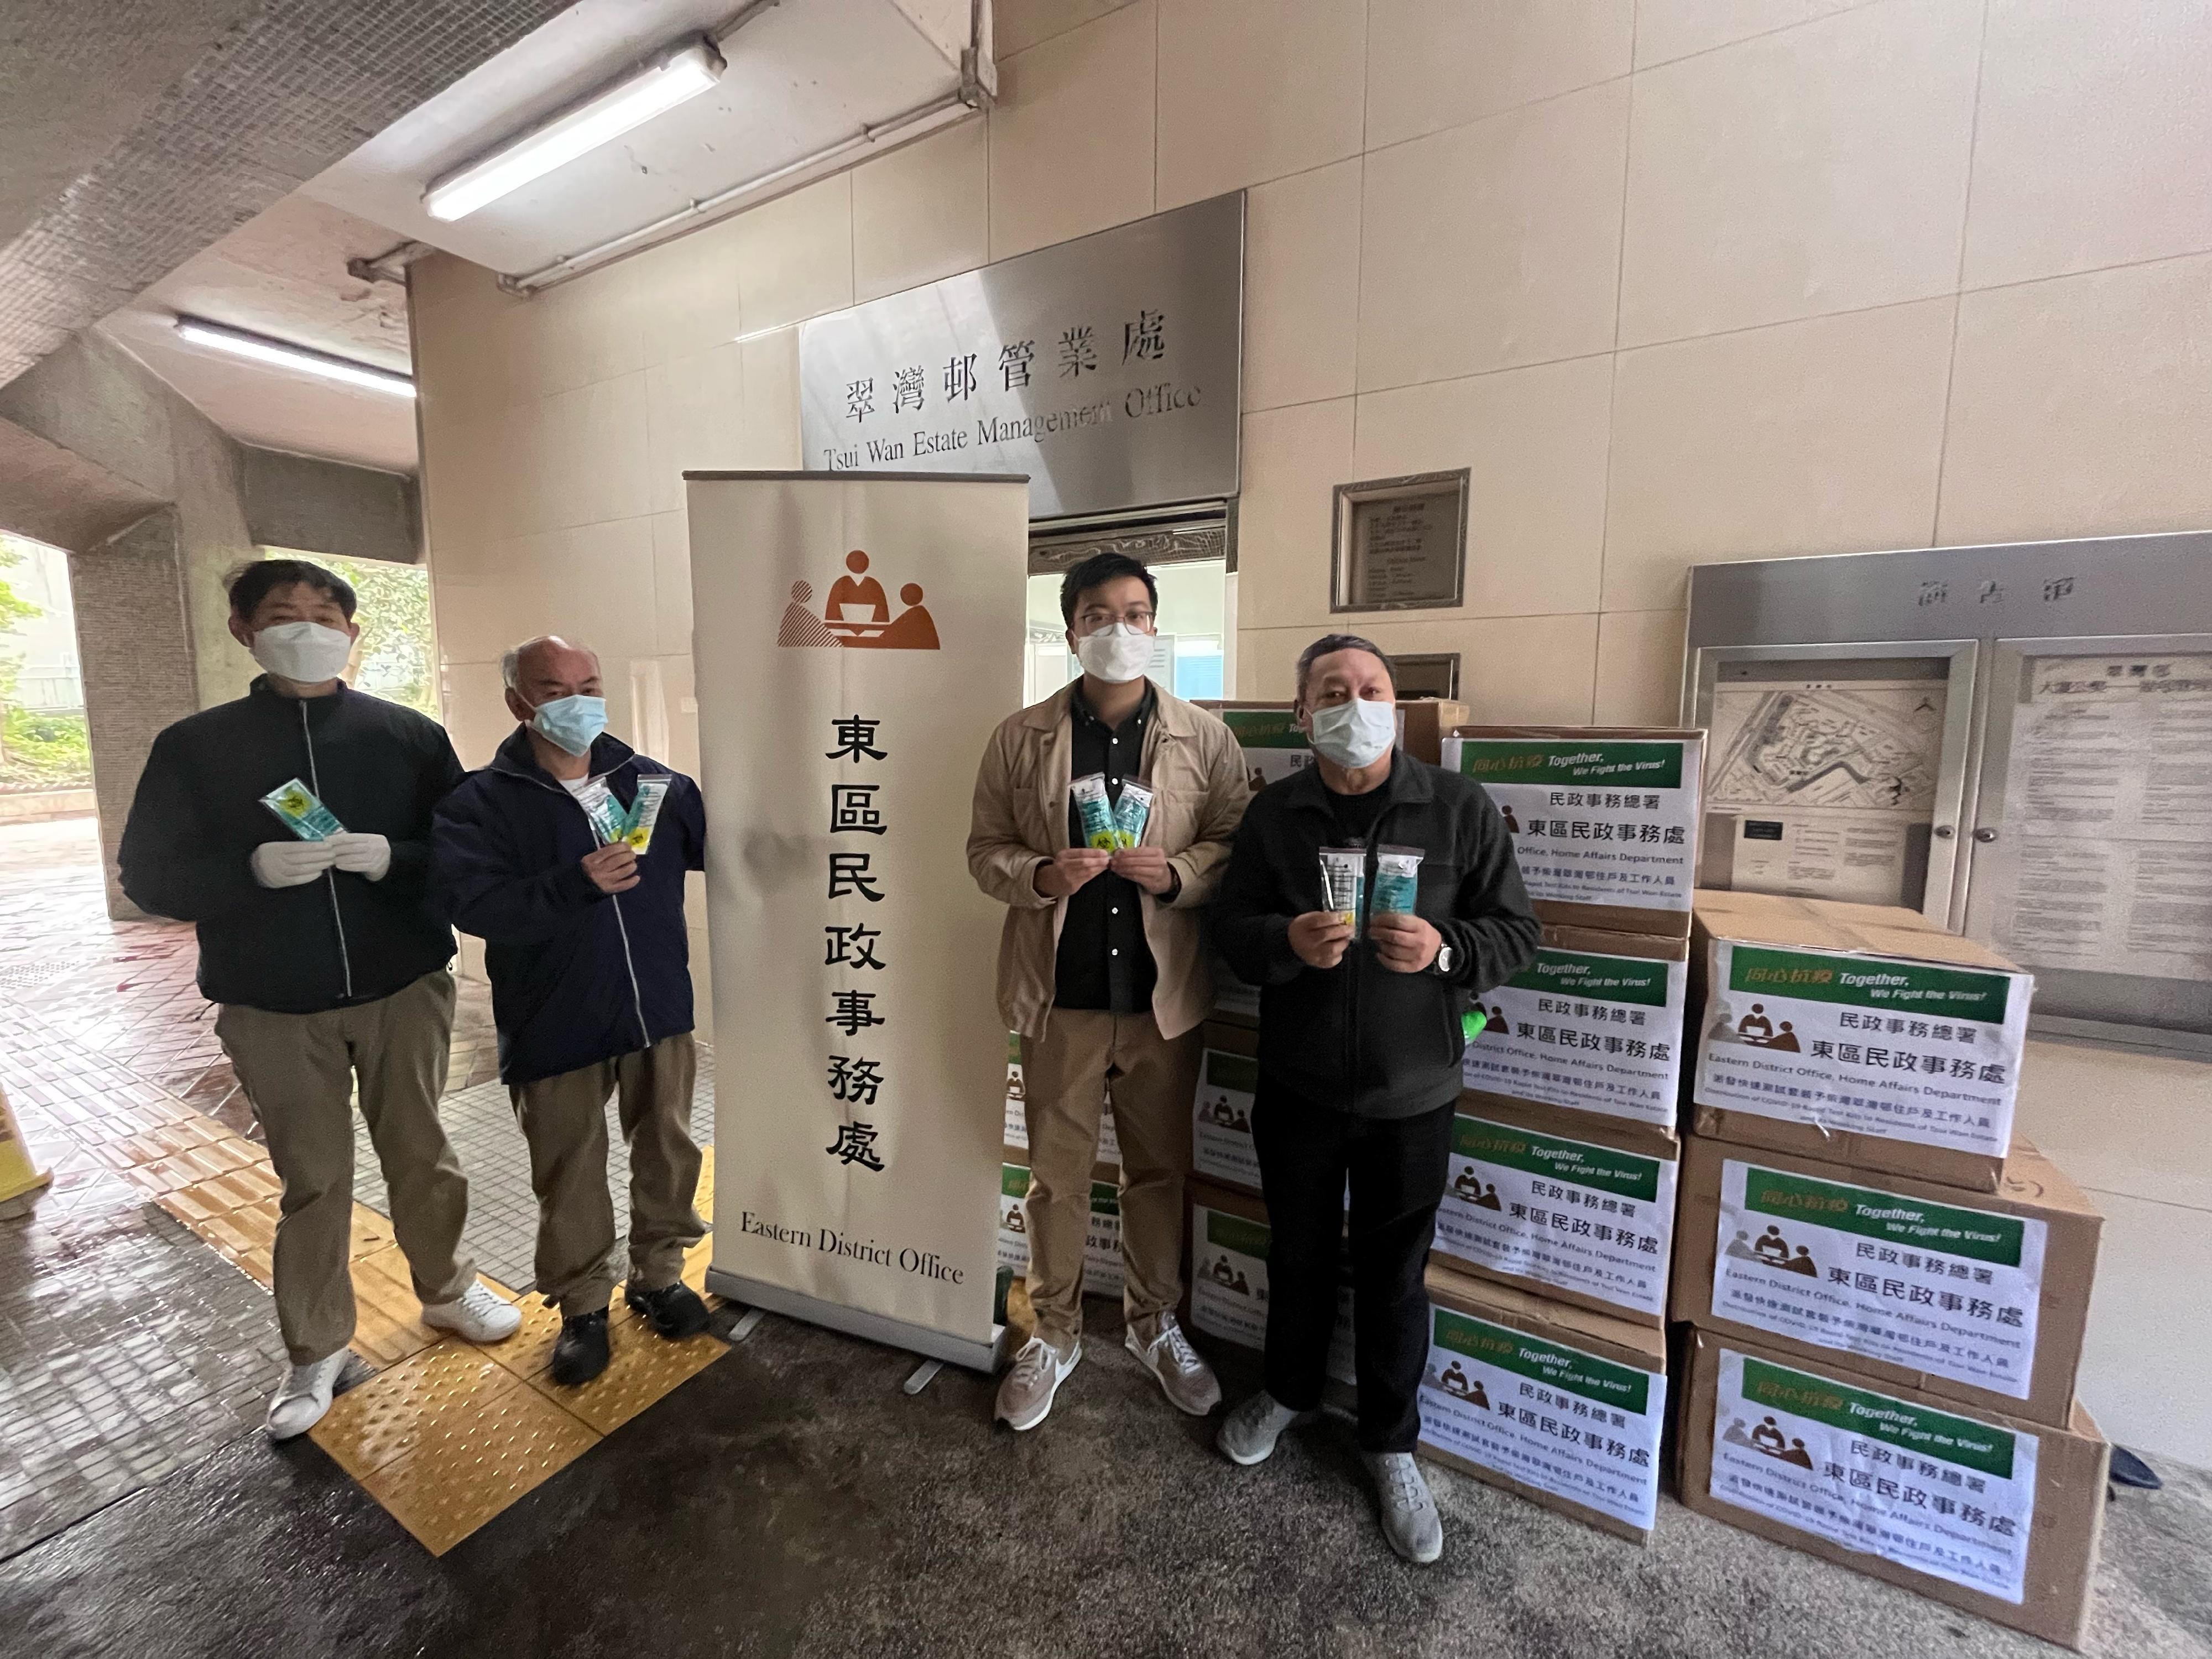 The Eastern District Office today (February 27) distributed COVID-19 rapid test kits to households, cleansing workers and property management staff living and working in Tsui Wan Estate, Chai Wan for voluntary testing through the property management company.